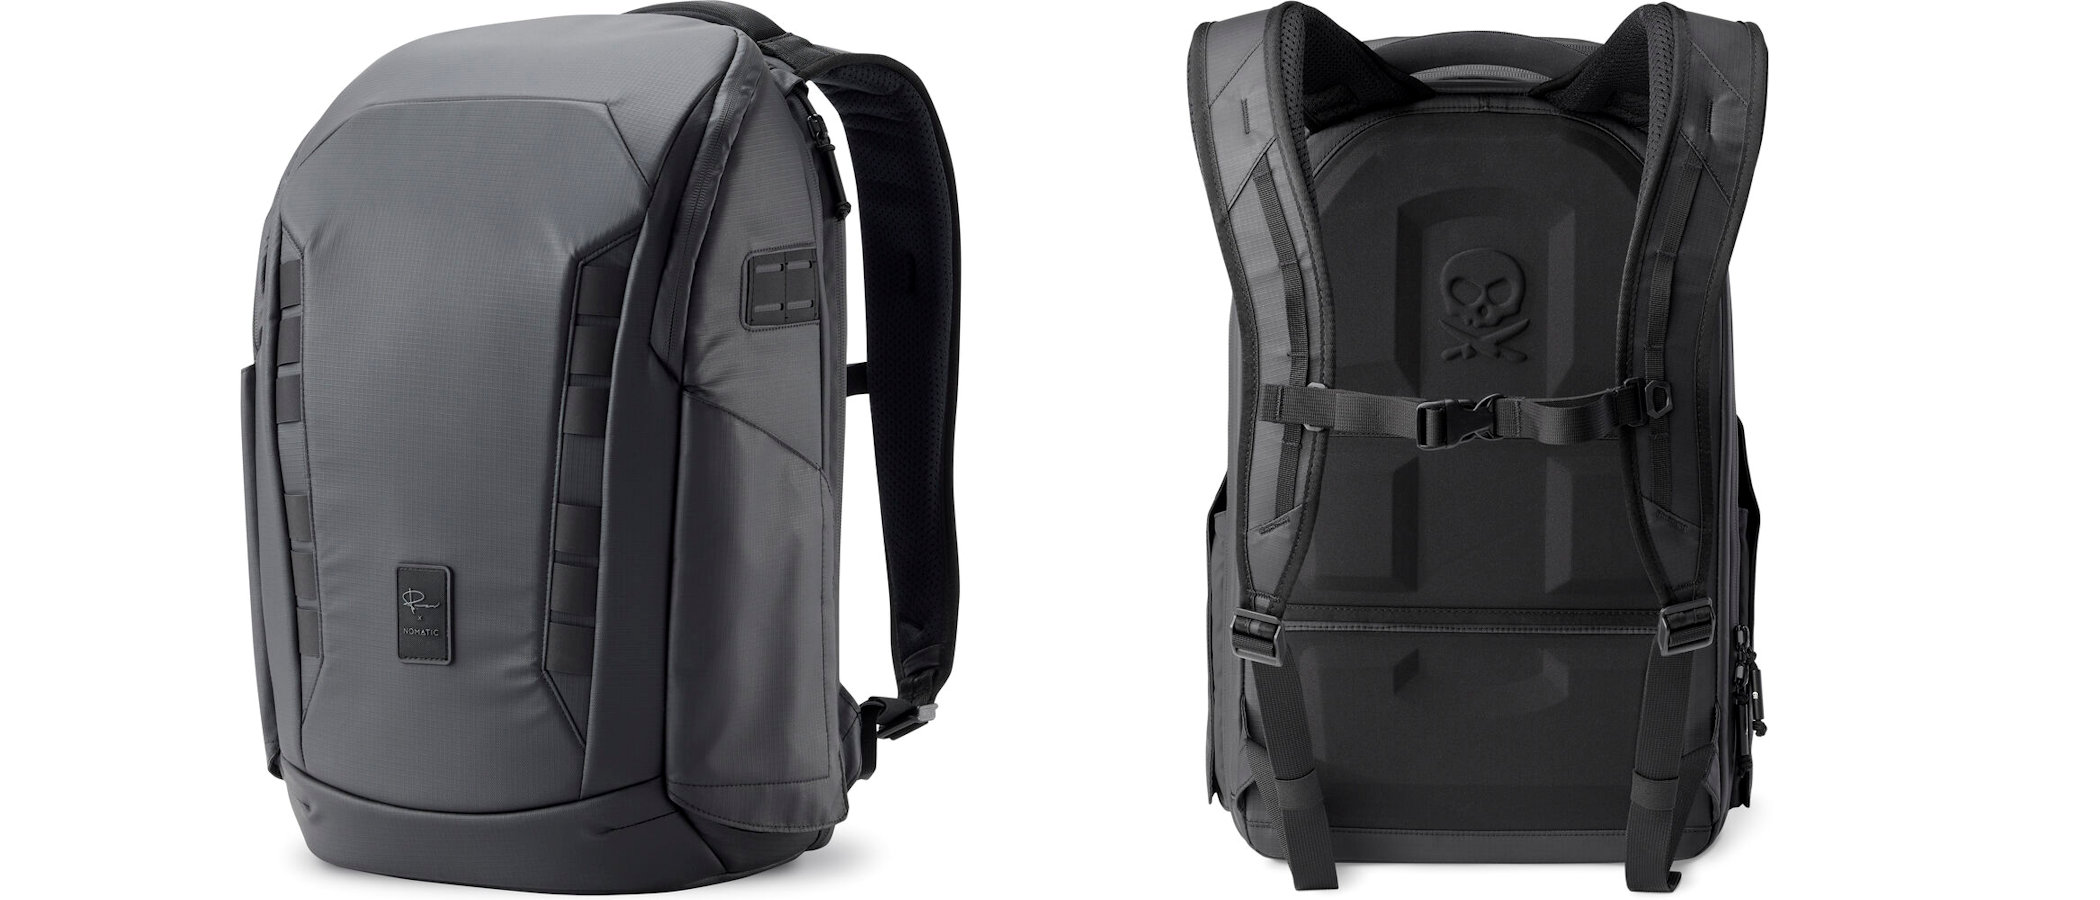 McKinnon 35L Camera Pack Review  Just The Thing For Every Photographer  This Holiday